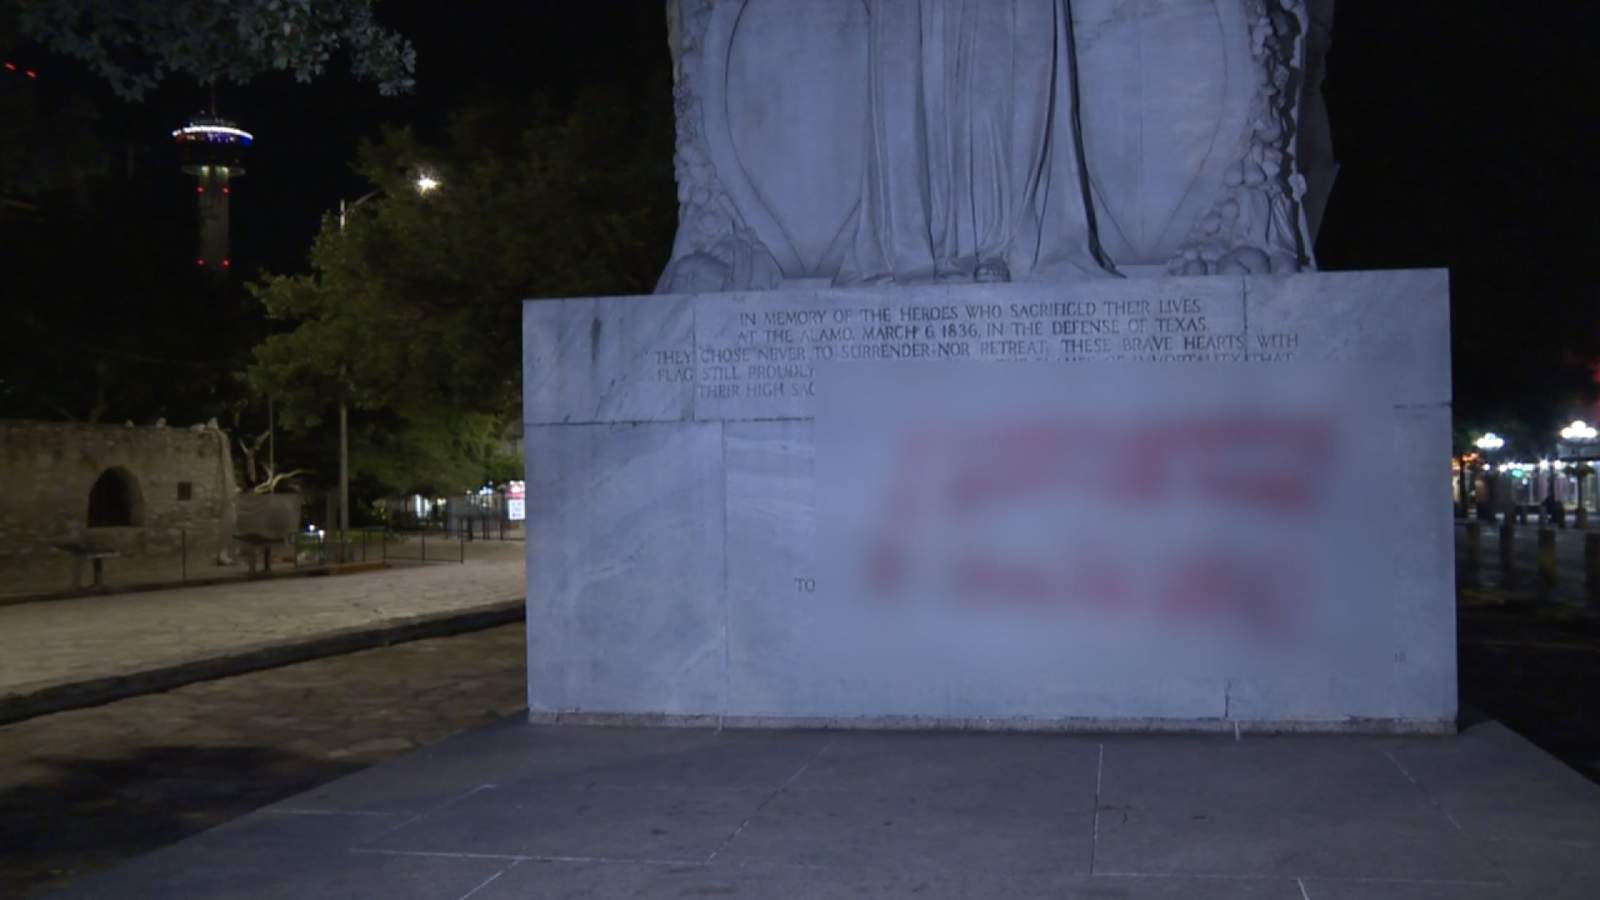 Graffiti found in multiple places downtown, including Cenotaph in Alamo Plaza